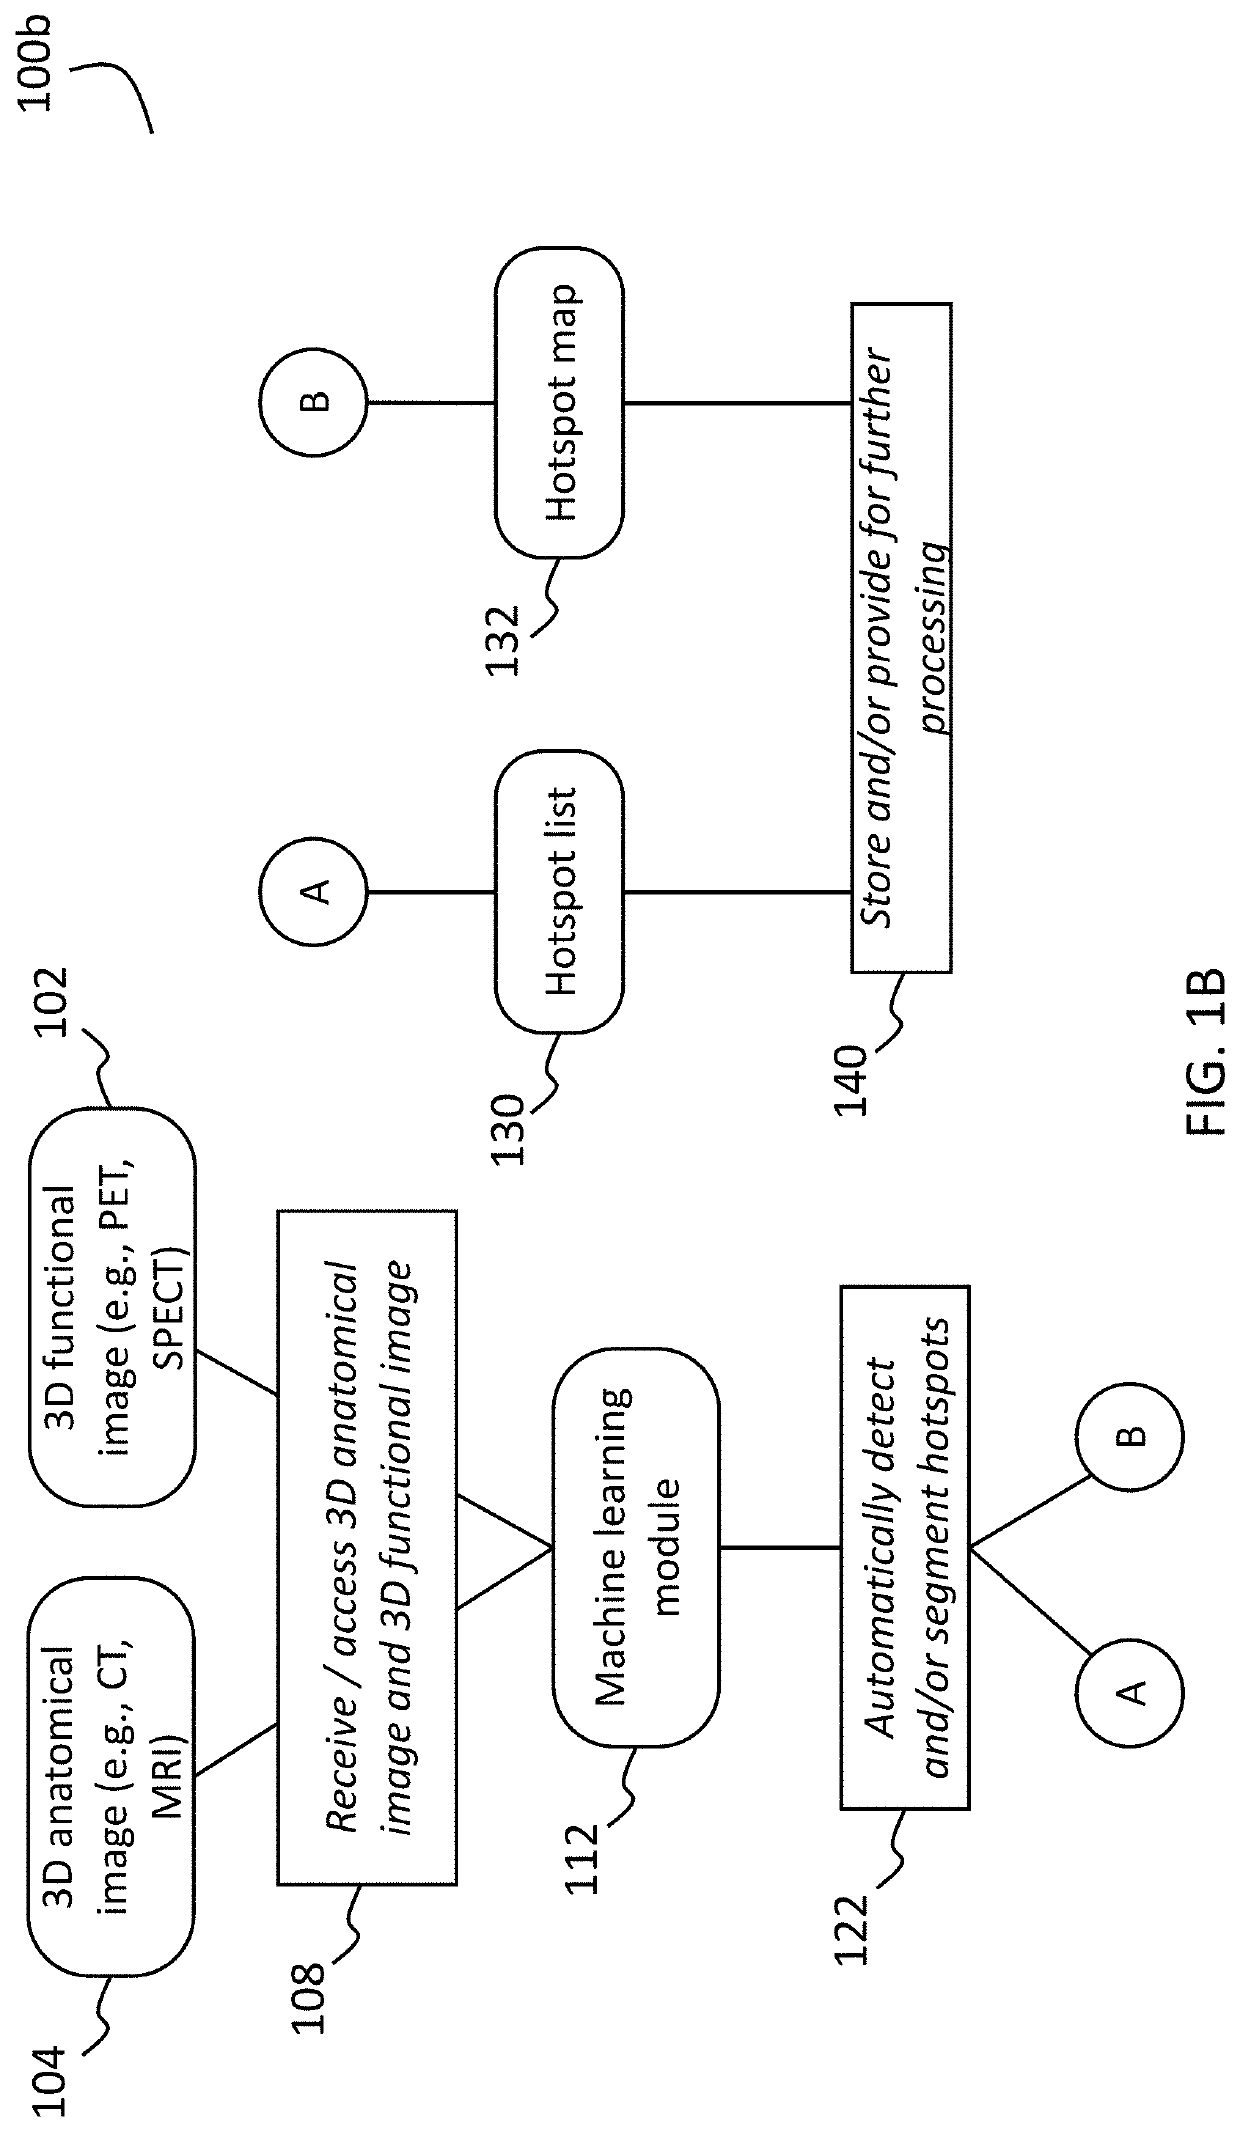 Systems and methods for artificial intelligence-based image analysis for detection and characterization of lesions